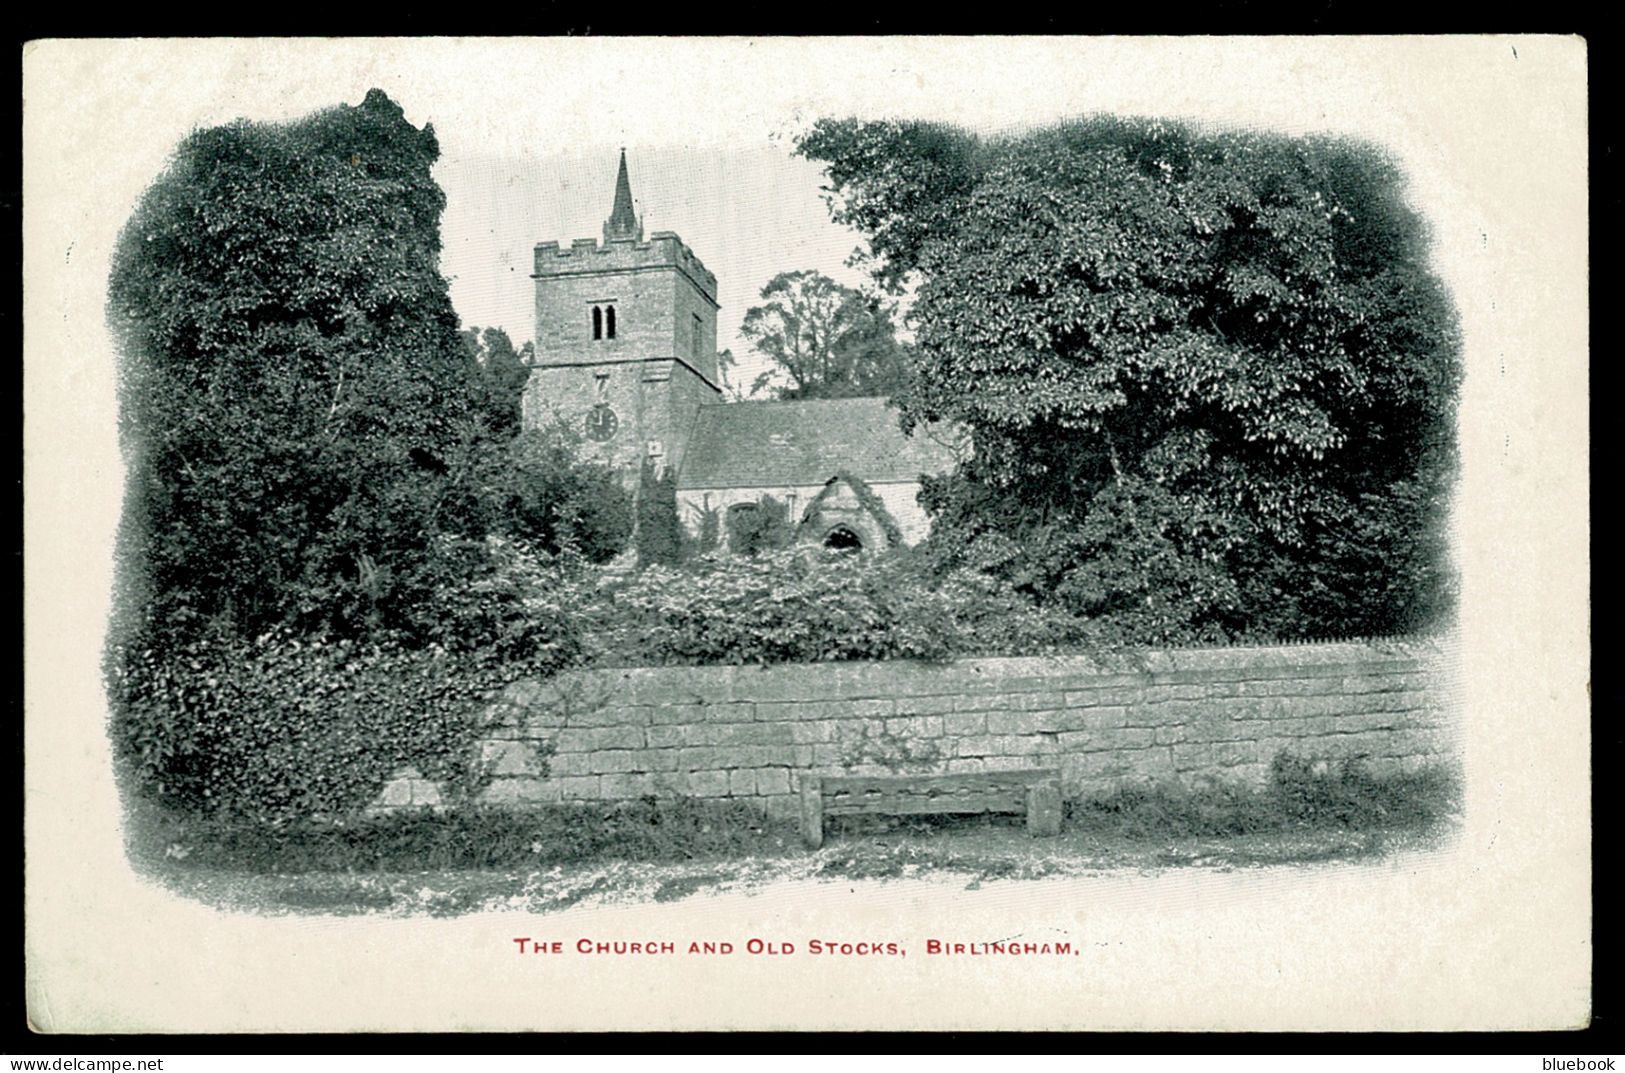 Ref 1624 - Early Postcard - Birlingham Chuch & Old Stocks Near Pershore Worcestershire - Pershore